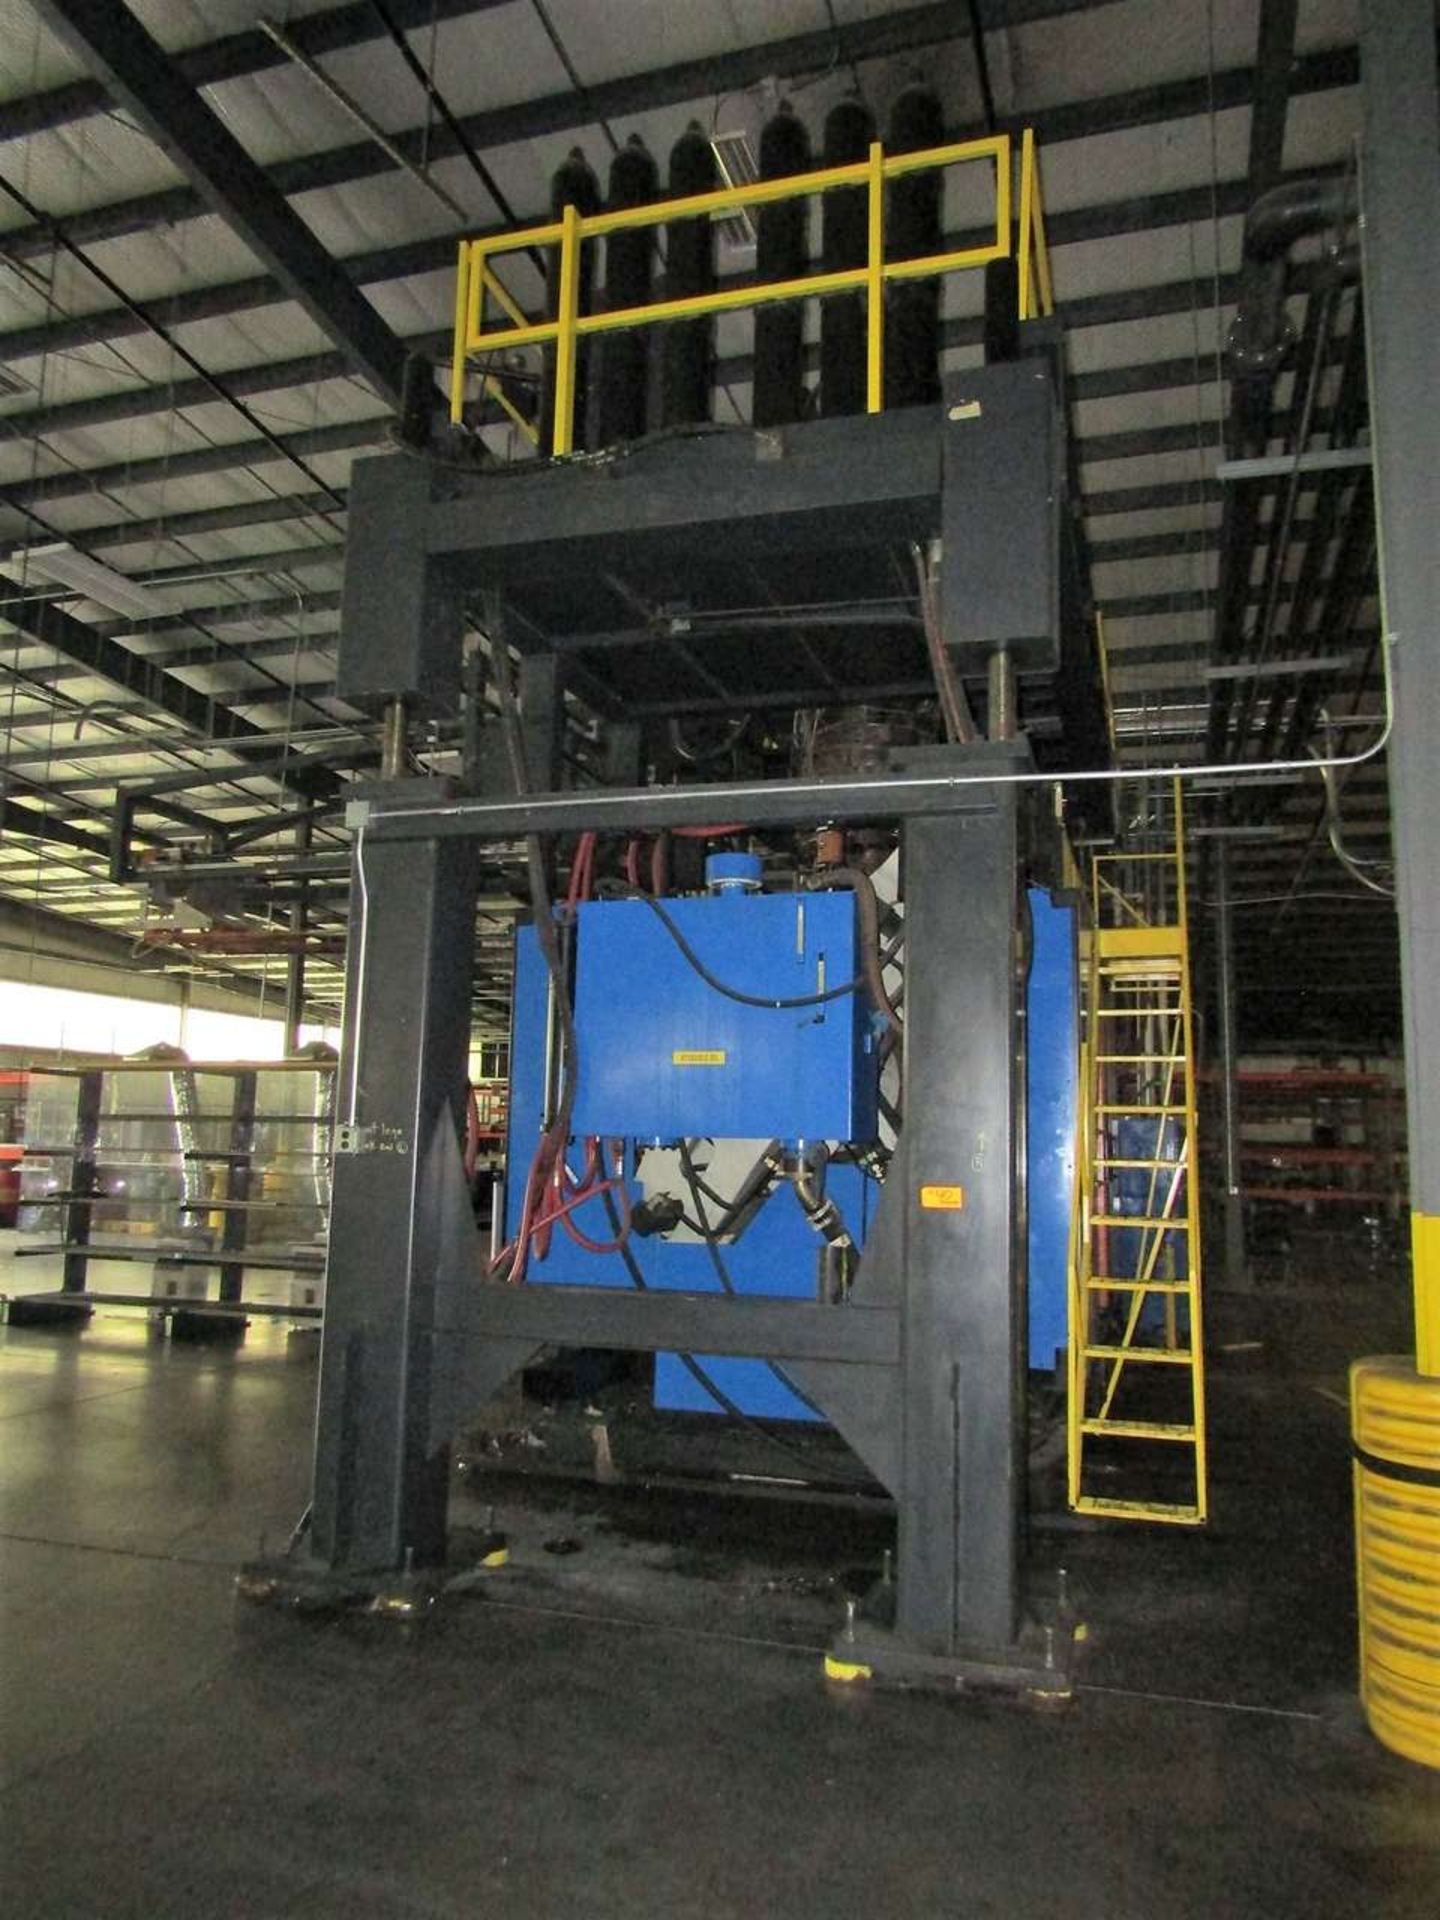 75lbs Cincinnati Milacron T2000V-150G-S75 Blow Mold Injection Machine Extruder Size: 150mm - Image 7 of 7